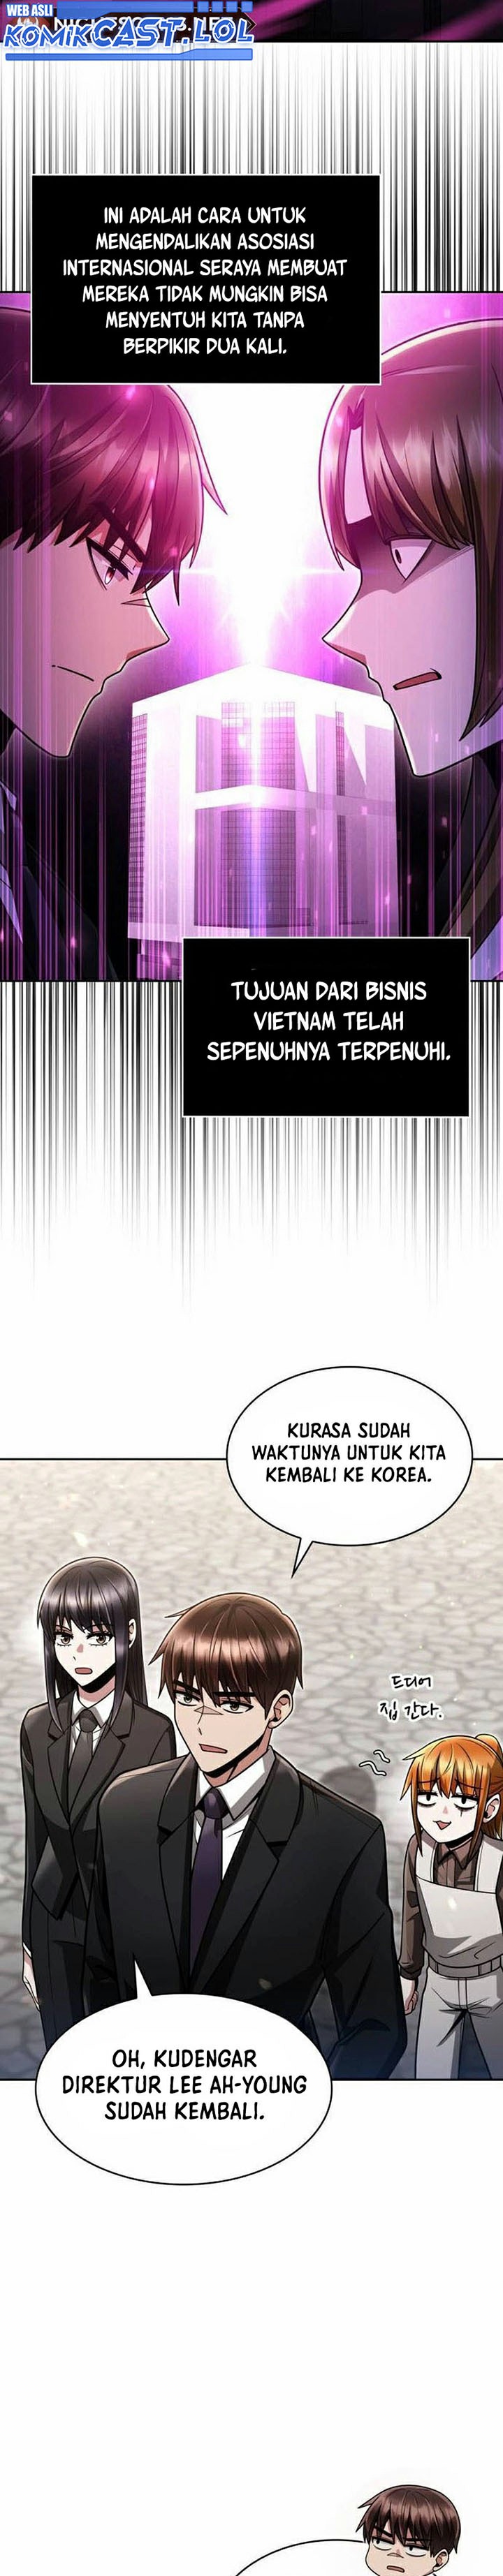 Dilarang COPAS - situs resmi www.mangacanblog.com - Komik clever cleaning life of the returned genius hunter 062 - chapter 62 63 Indonesia clever cleaning life of the returned genius hunter 062 - chapter 62 Terbaru 9|Baca Manga Komik Indonesia|Mangacan